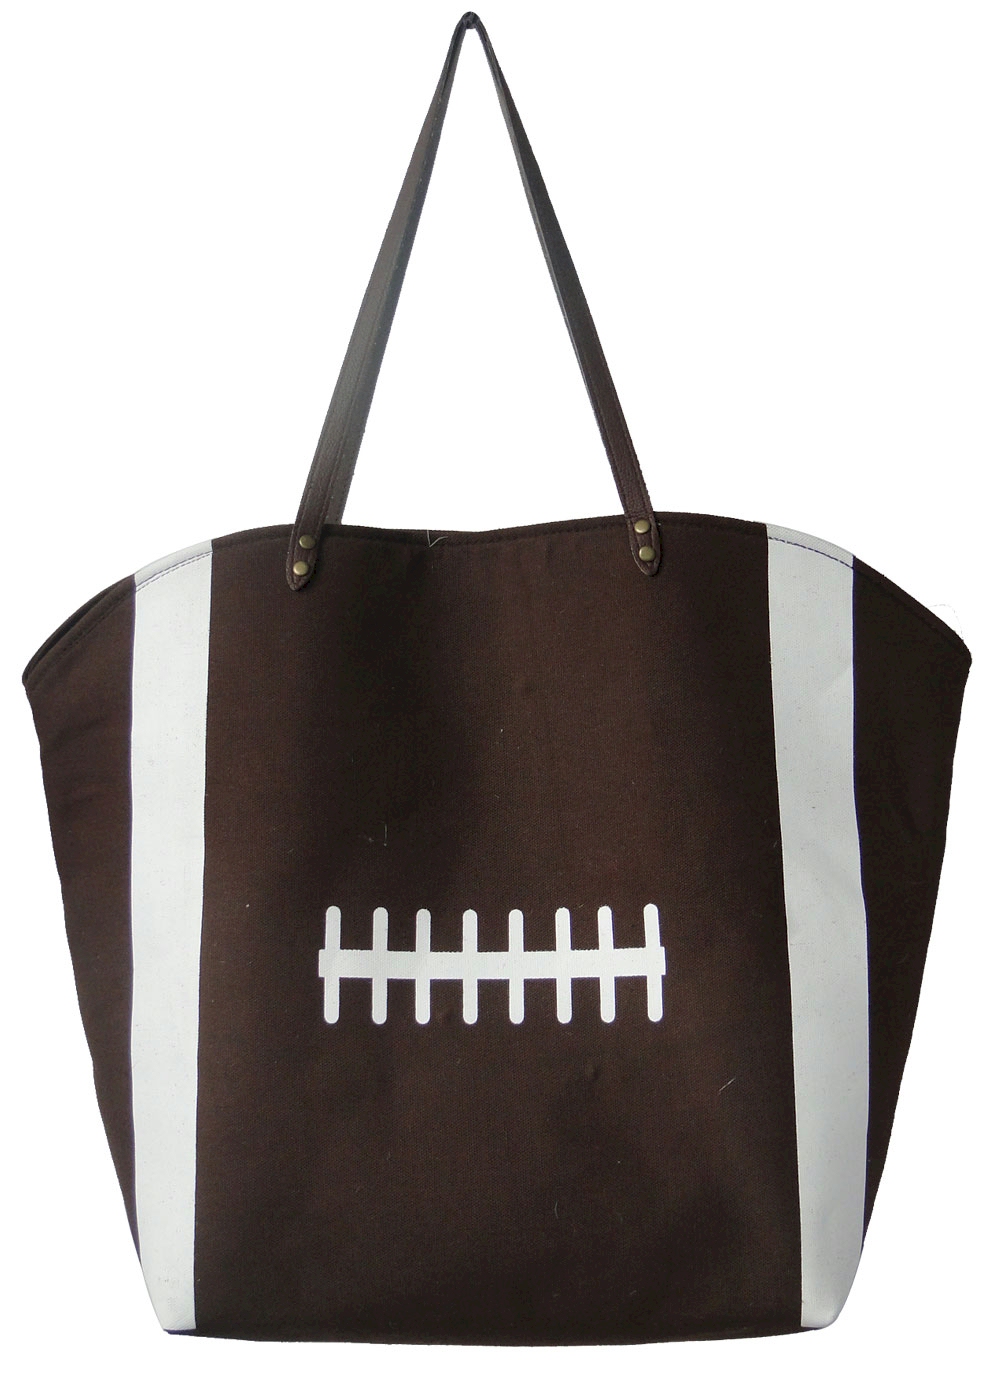 The "Touchdown" Football Canvas Tote - IRREGULAR PRINTING